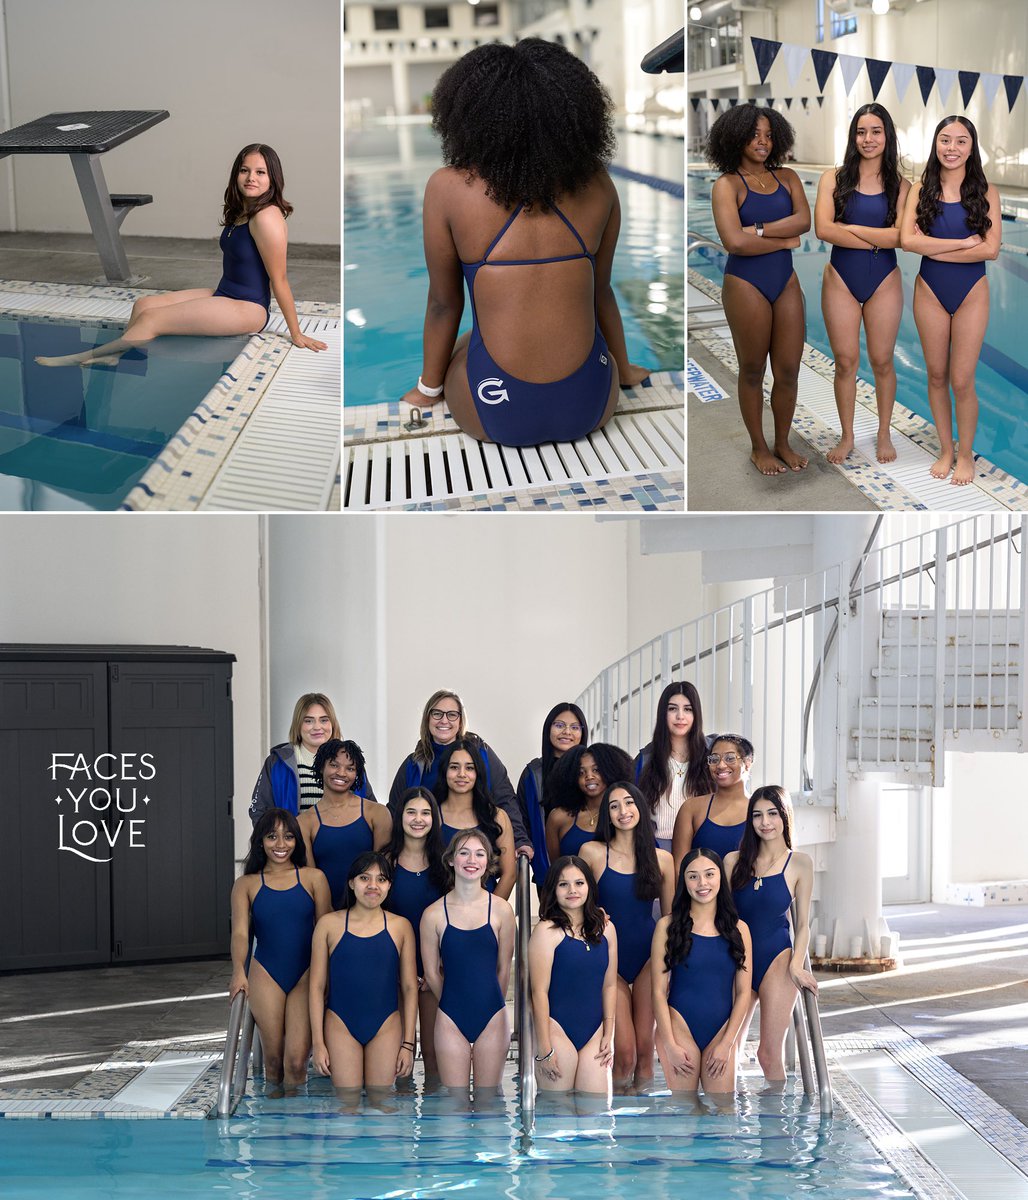 Started my week photographing the amazing young women that make up the @GHS_GrandviewC4 swim team! Keep having a great season, lady bulldogs! @Rise_Above_GV #PlayForward #GHSPride